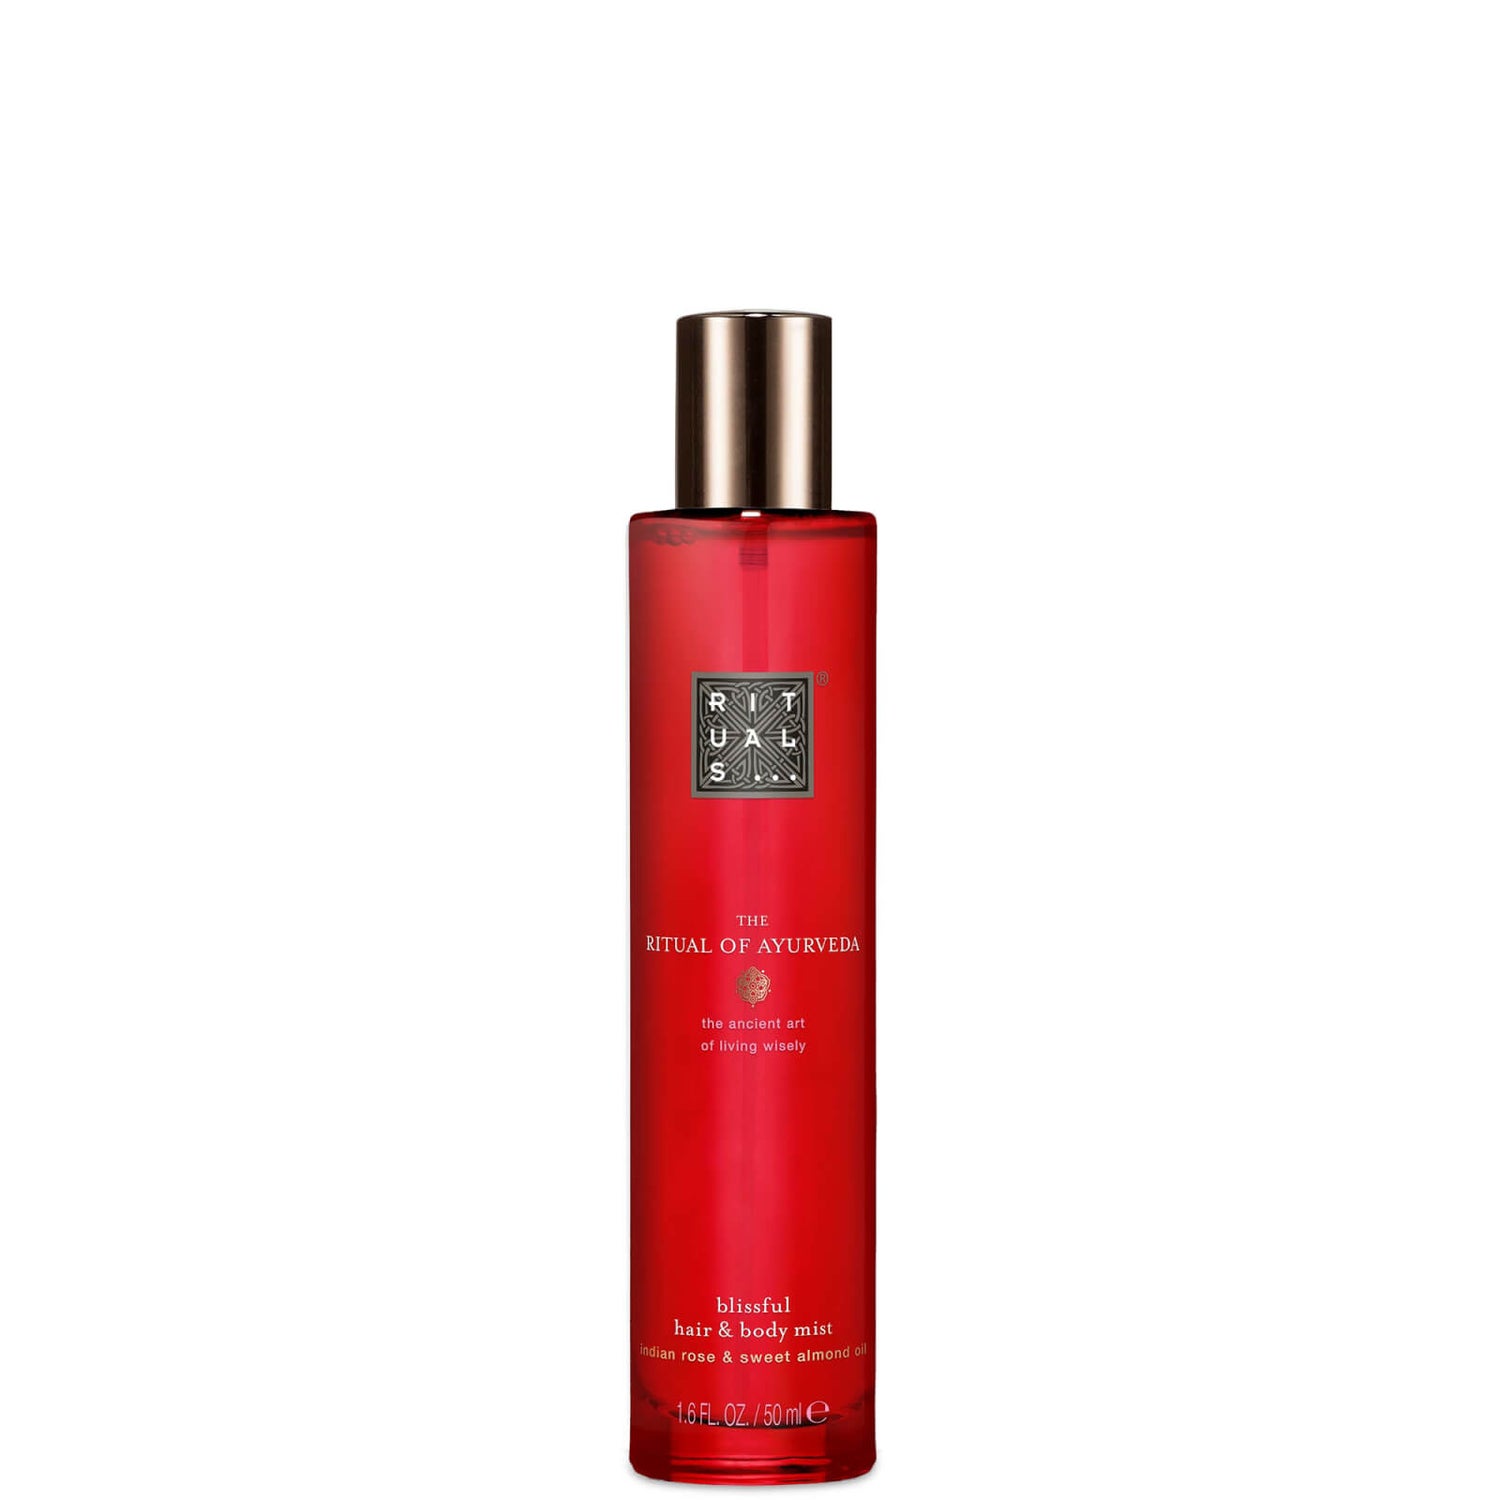 Rituals The Ritual of Ayurveda Hair and Body Mist 50ml